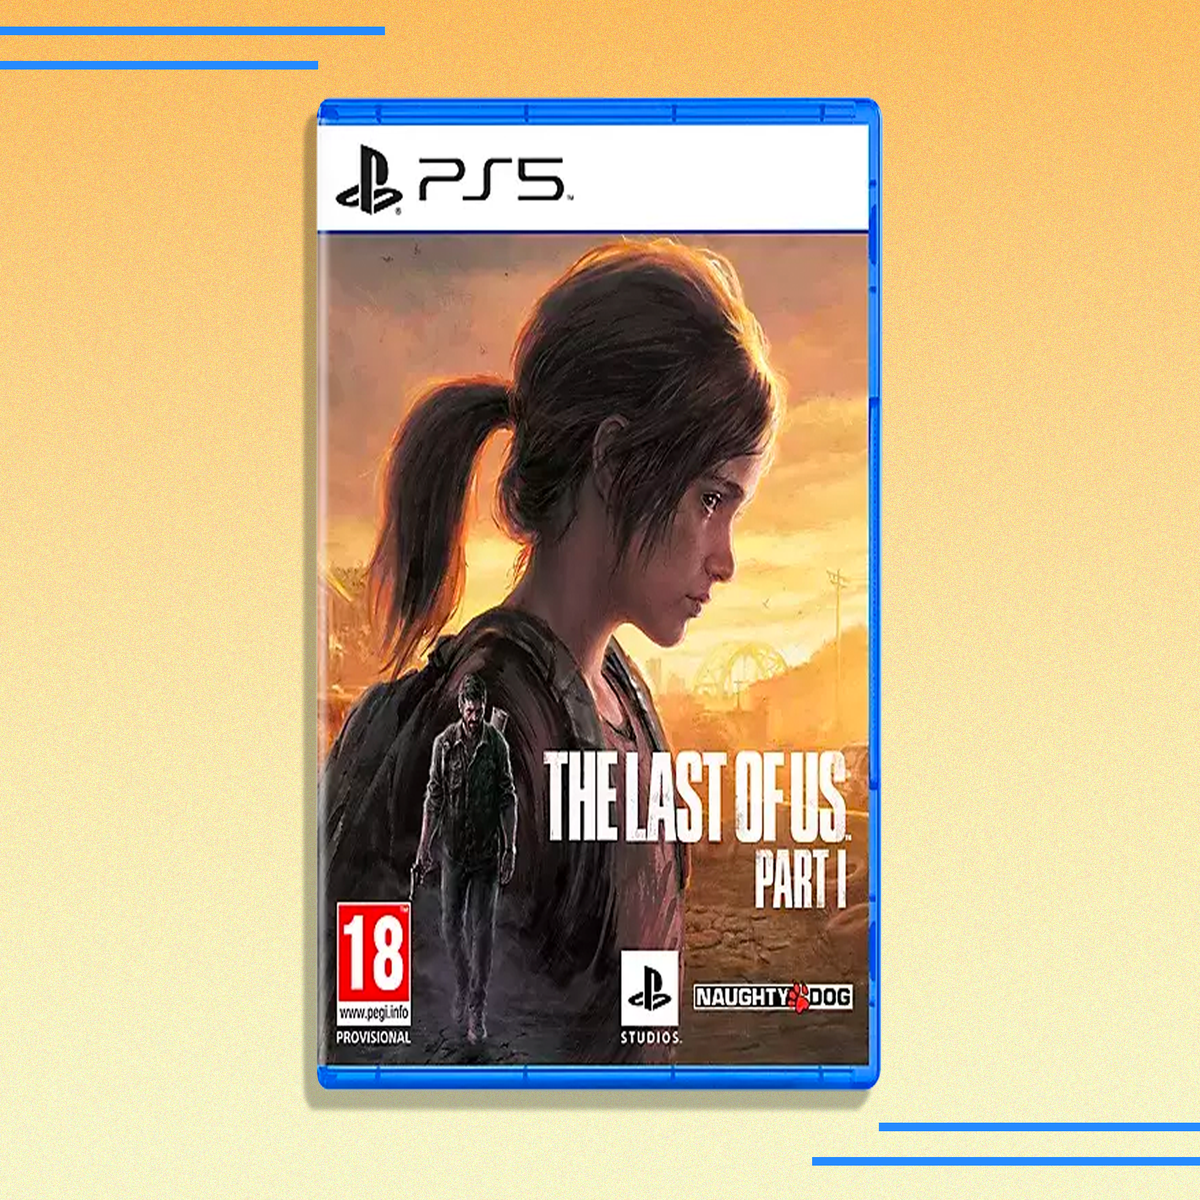 The Last of Us: Part 1 Remake PC BIG UPDATE FROM NAUGHTY DOG (TLOU